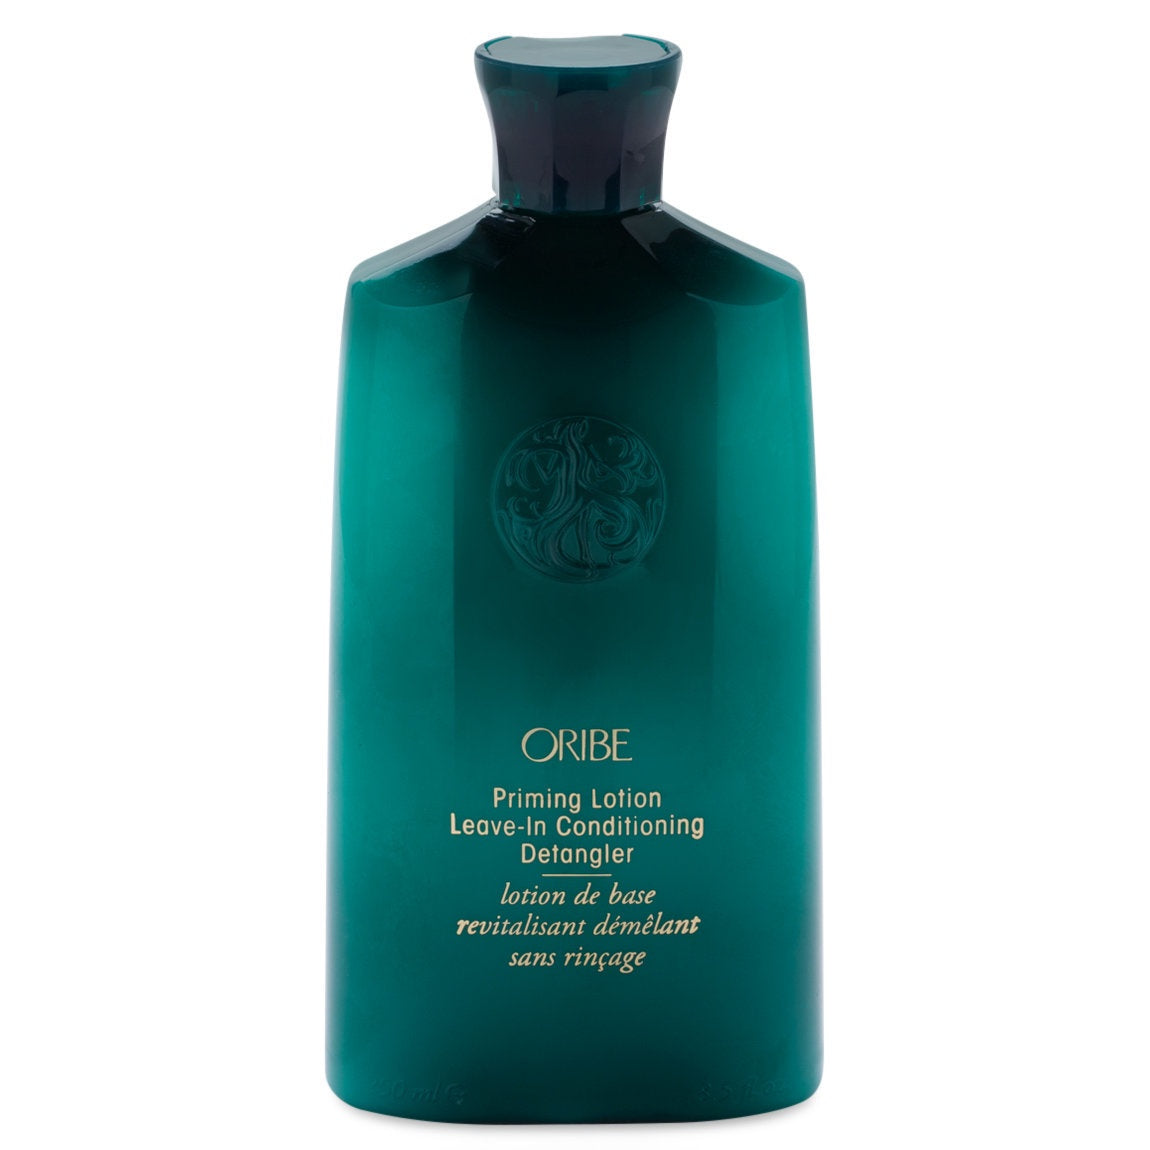 oribe - priming lotion leave in conditioning detangler - KISS AND MAKEUP